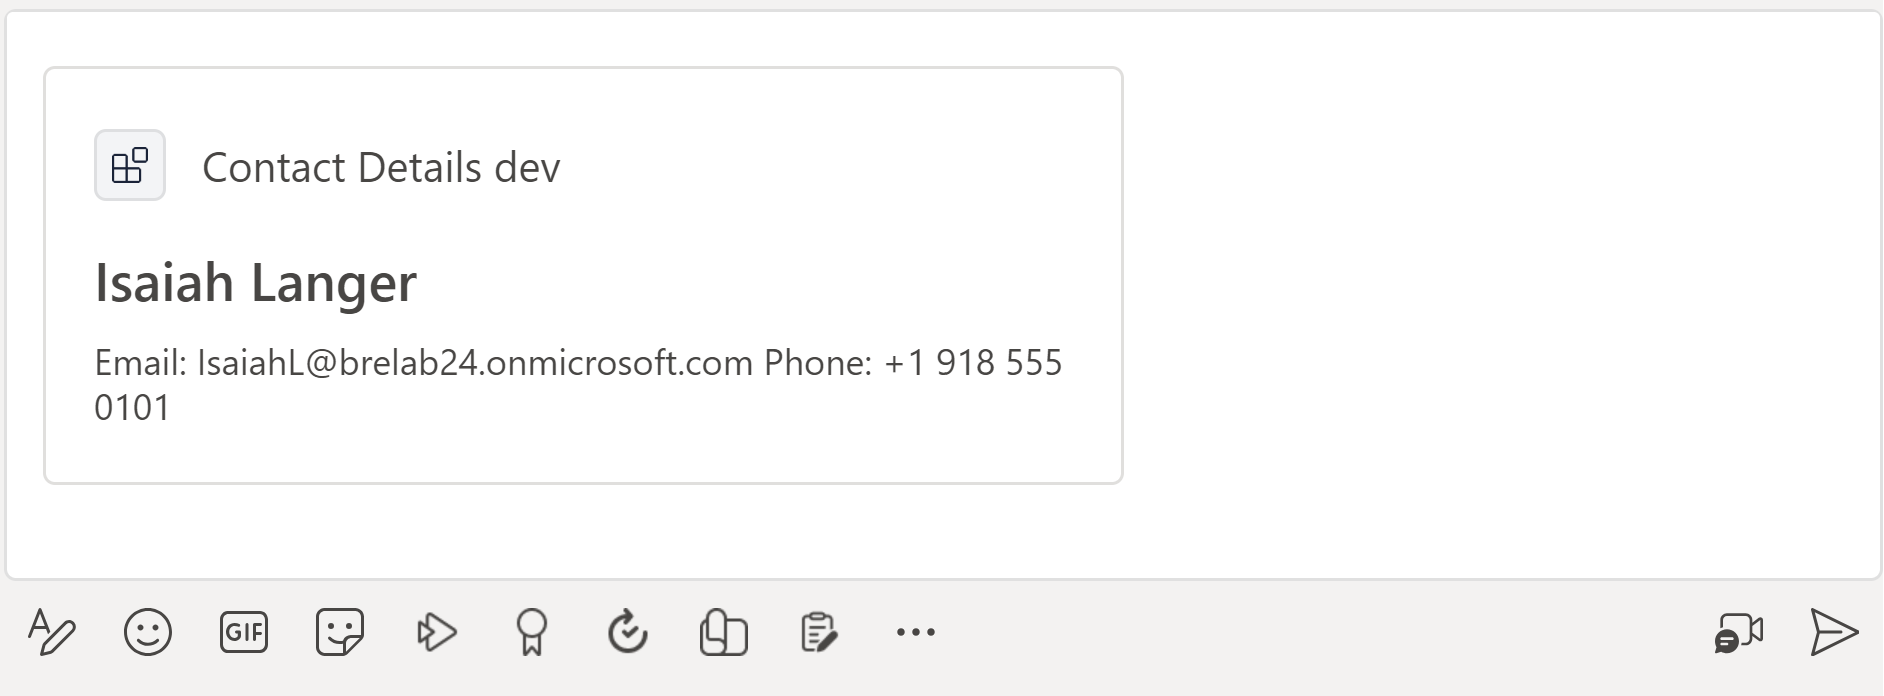 Screenshot of contact details app in Teams - inserting card into message.